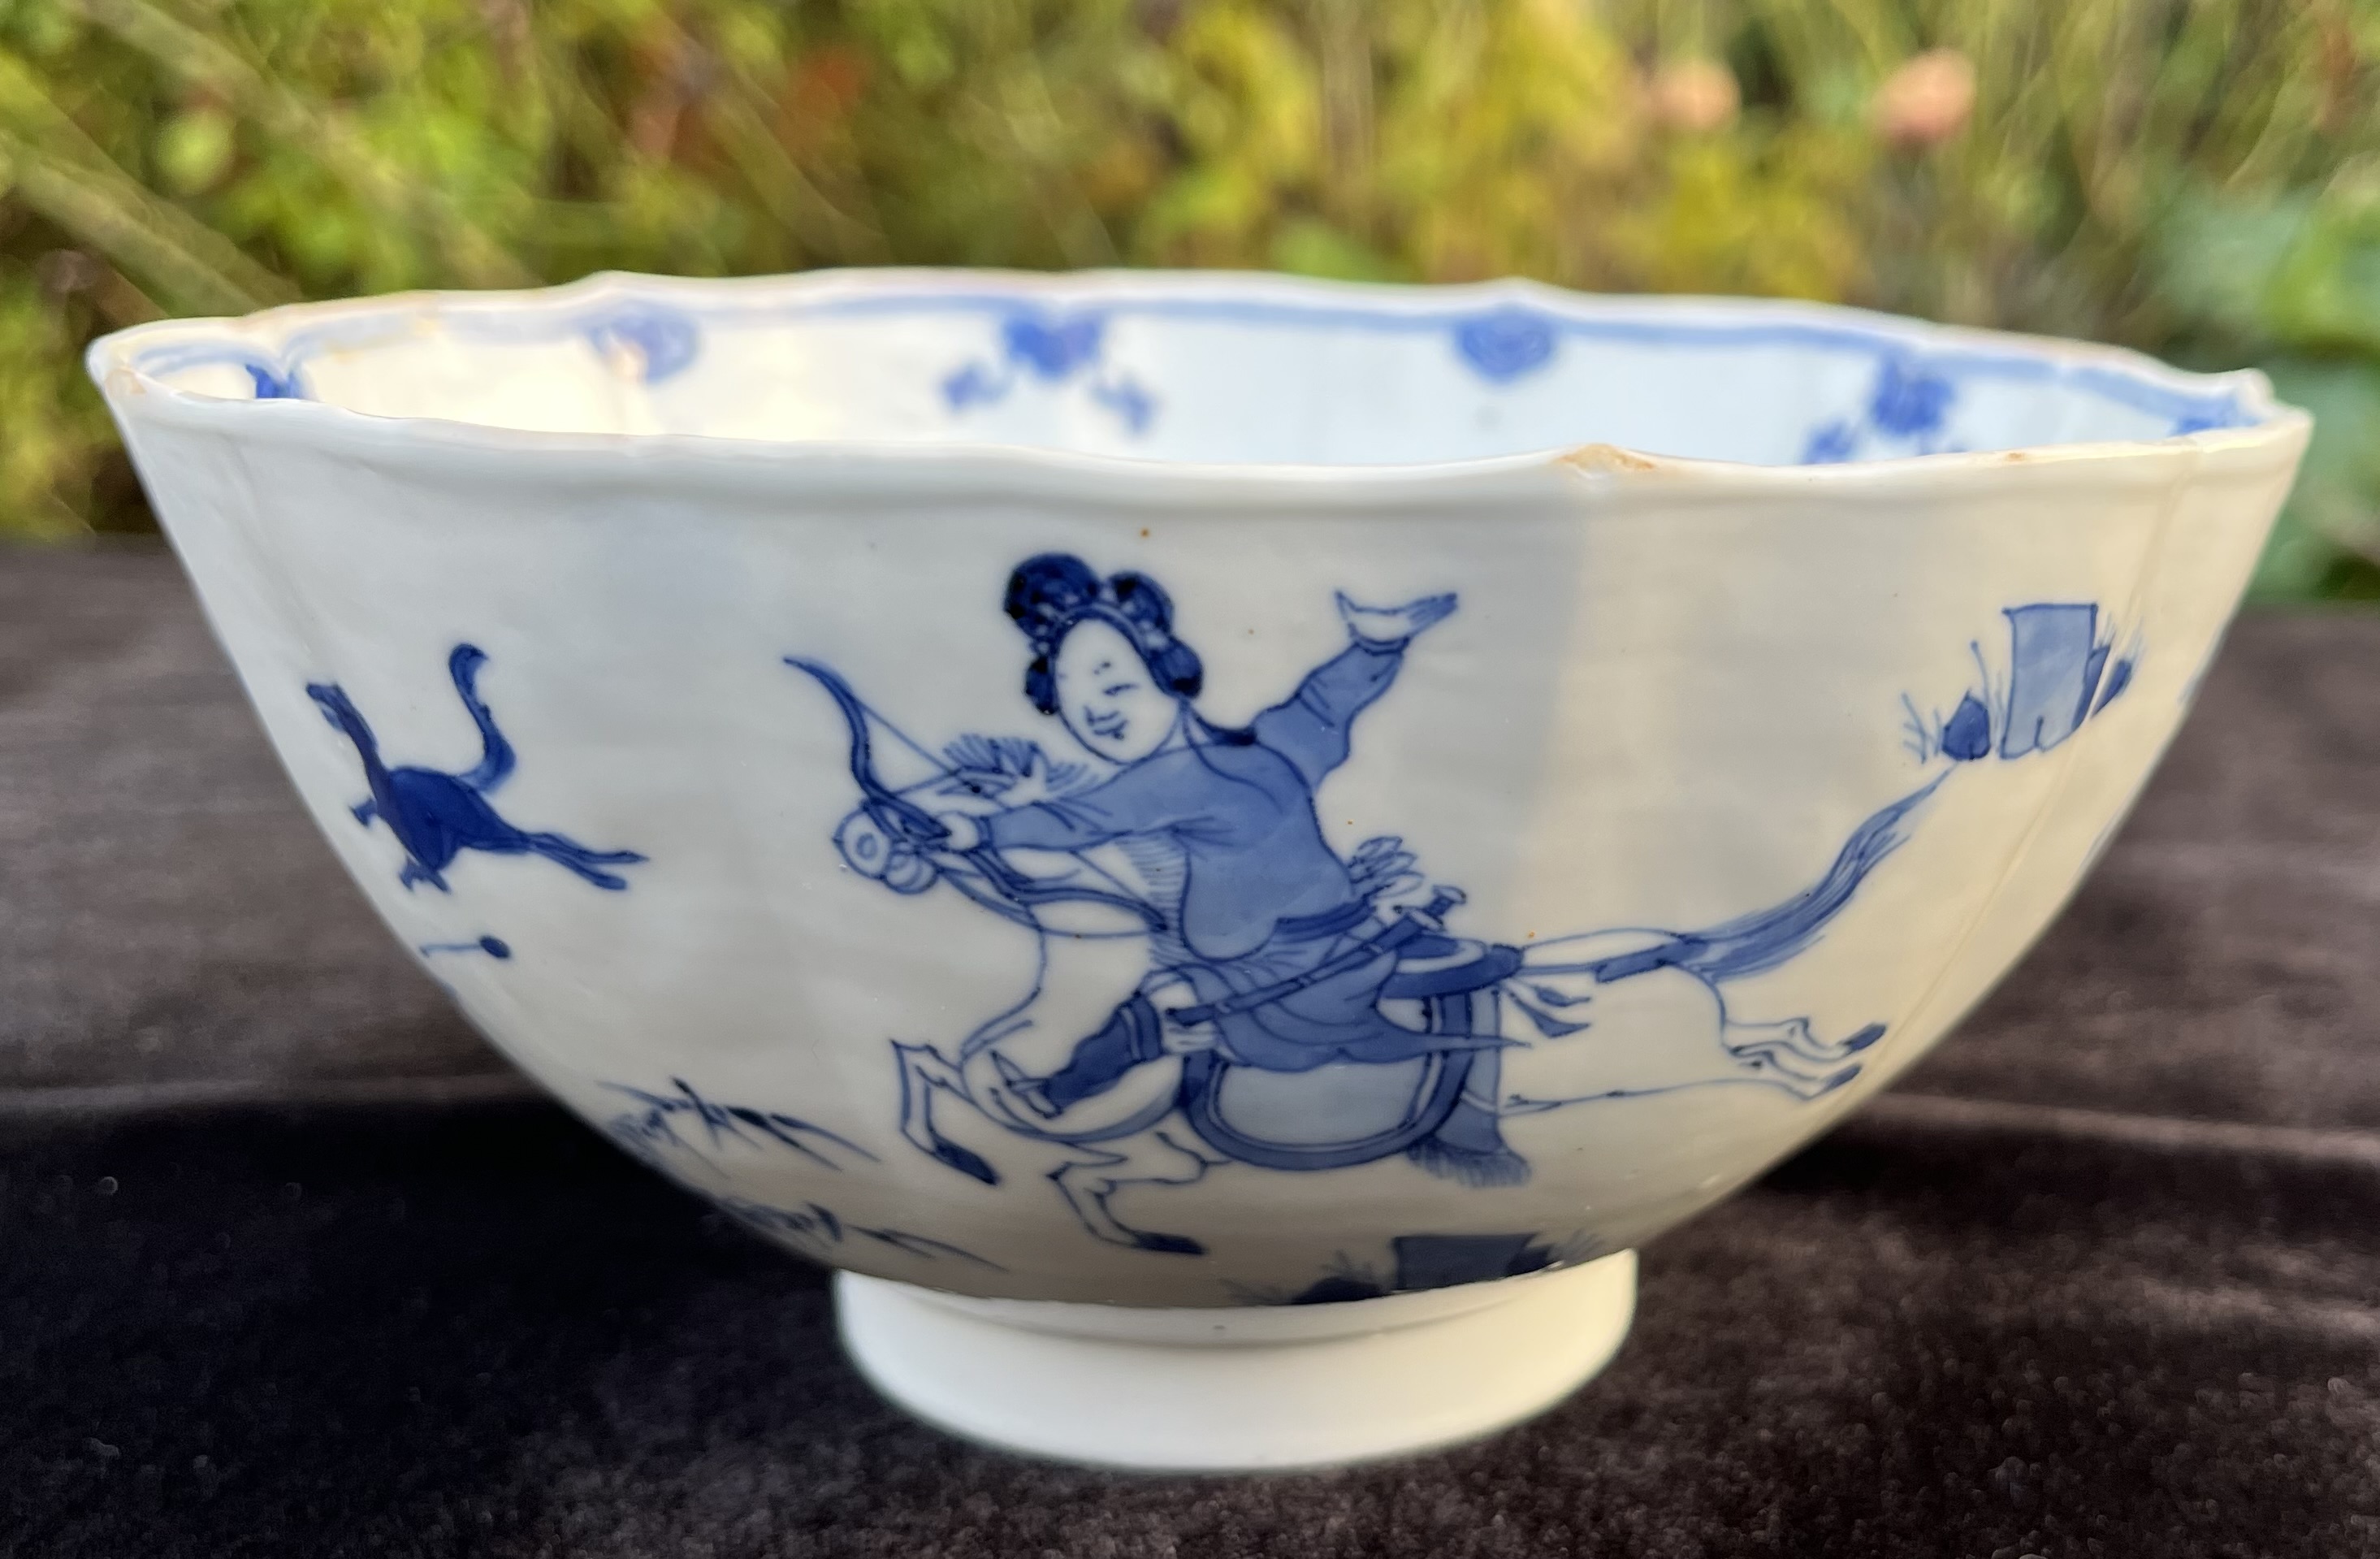 A CHINESE BLUE AND WHITE PORCELAIN BOWL, QING DYNASTY, KANGXI PERIOD, 1662 – 1722 - Image 8 of 12